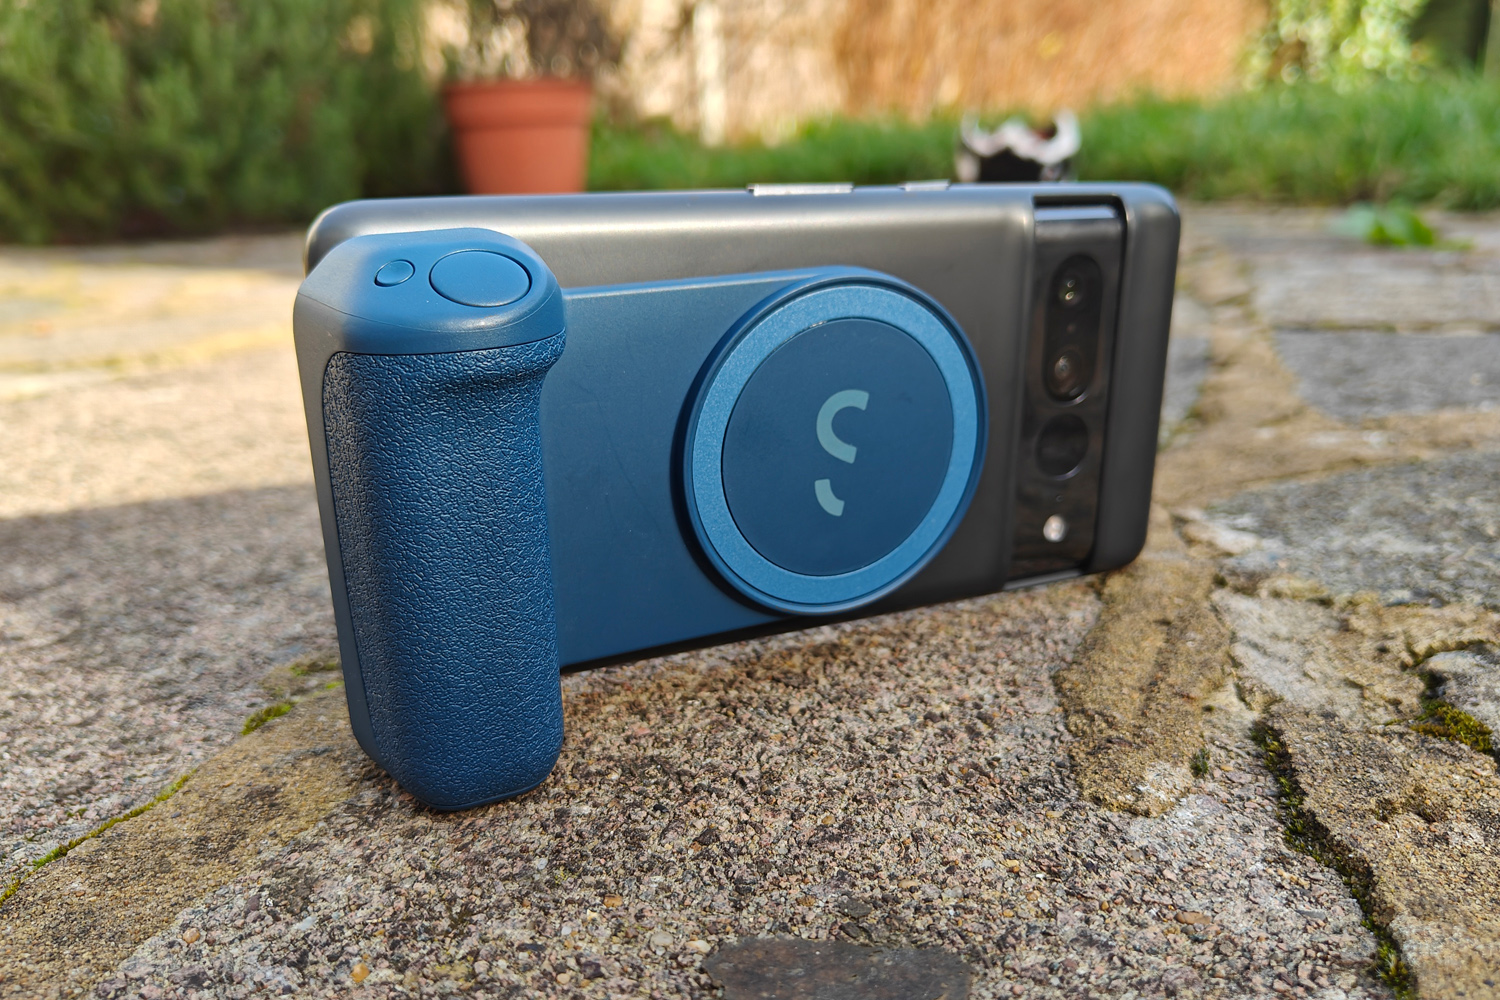 ShiftCam SnapGrip (Blue Jay)